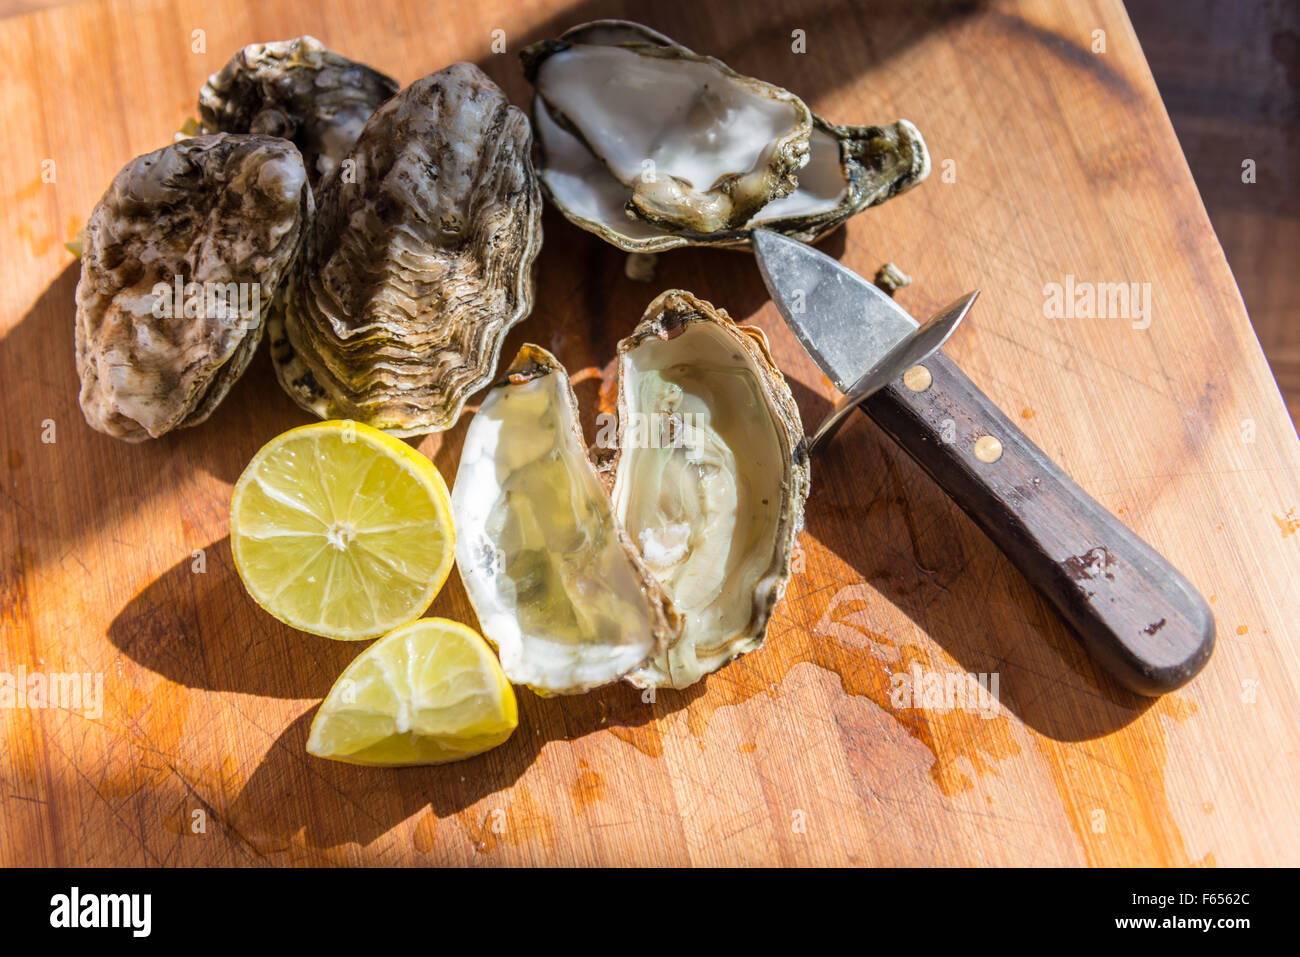 Oyster ready to eat Stock Photo